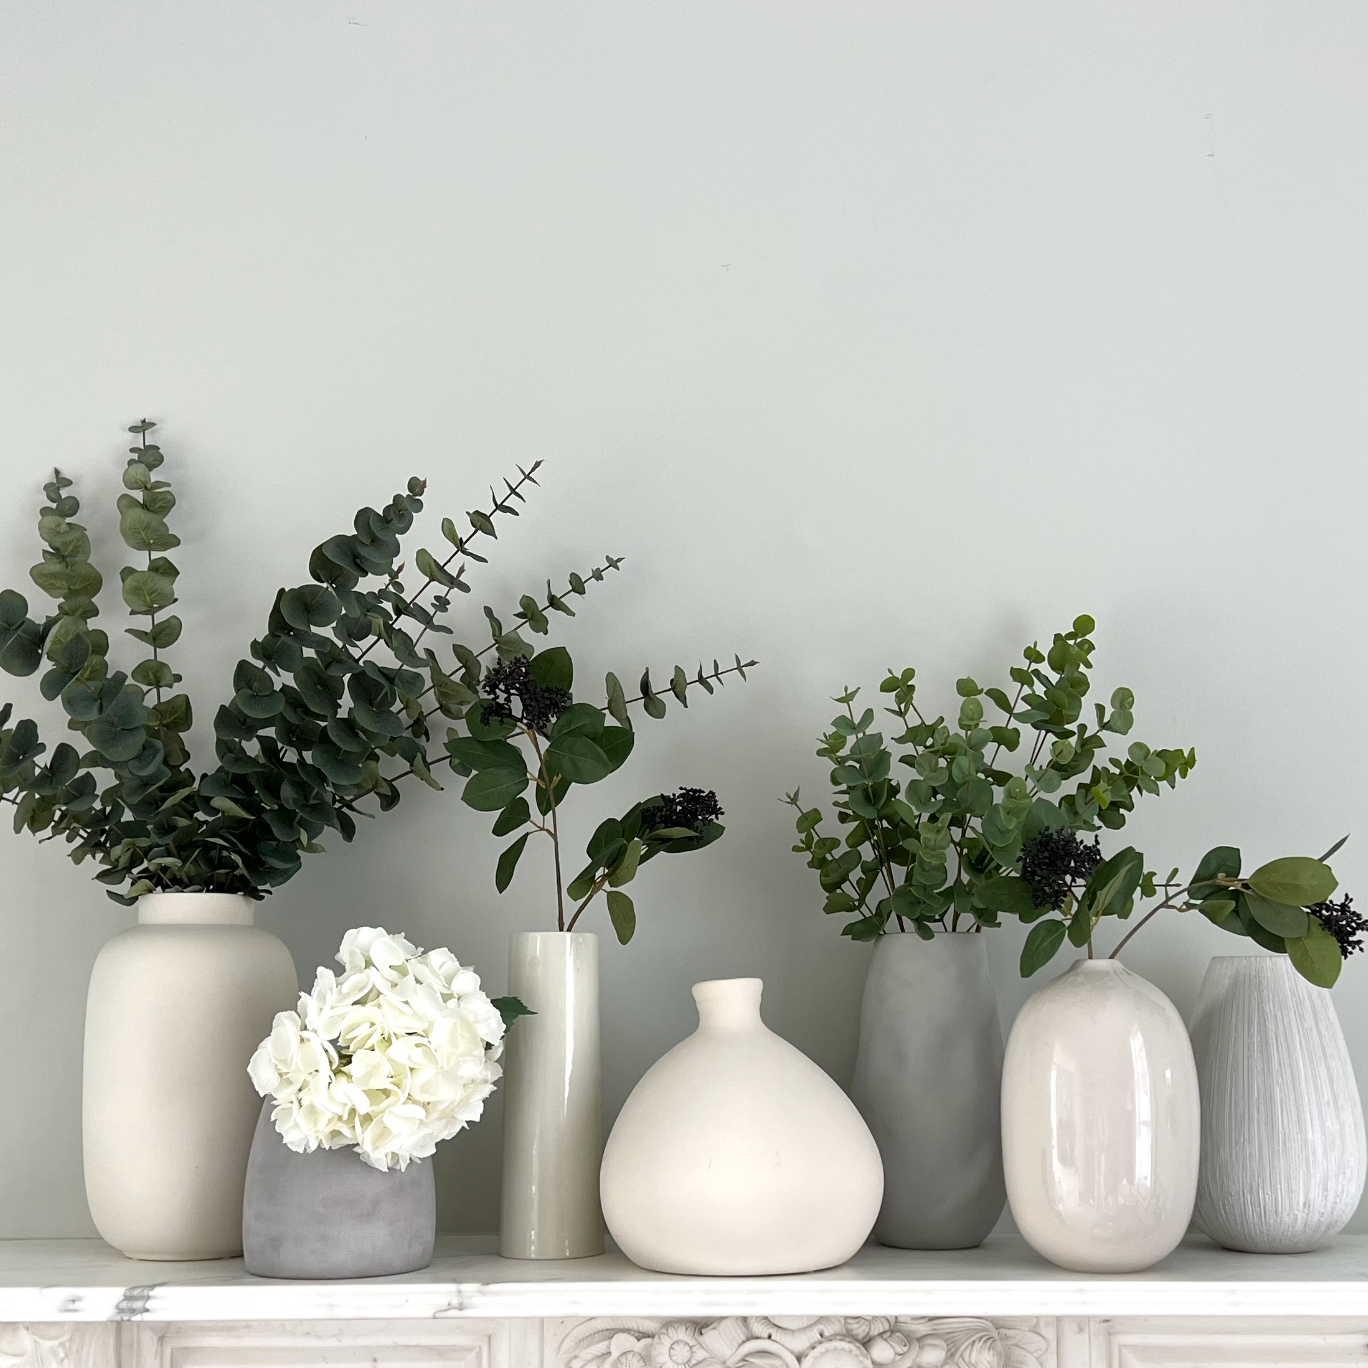 How to choose the perfect Ceramic Neutral White and Grey Vases for Luxury Lifelike Realistic Artificial Fabric Silk Luxury Flower Stem Bouquets with Foliage Buy Online from The Faux Flower Company